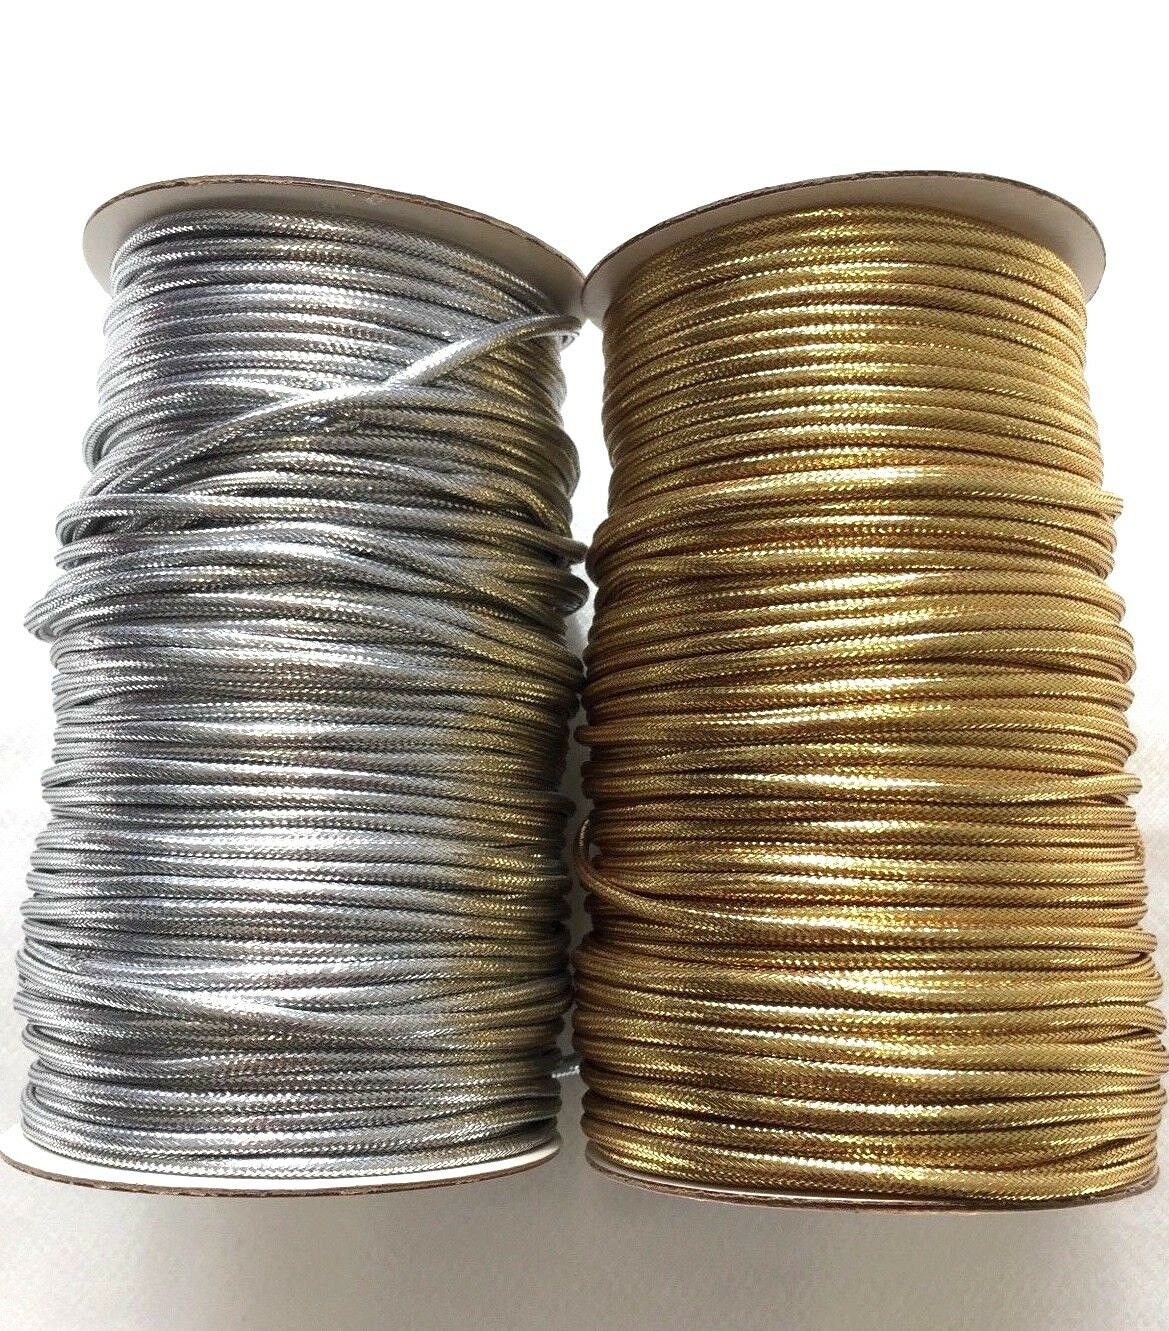 2 Rolls Metallic Elastic Cords Stretch Cord Ribbon Metallic Tinsel Cord  Rope for Craft Making Gift Wrapping, 1 mm 55 Yards (Gold and Silver)